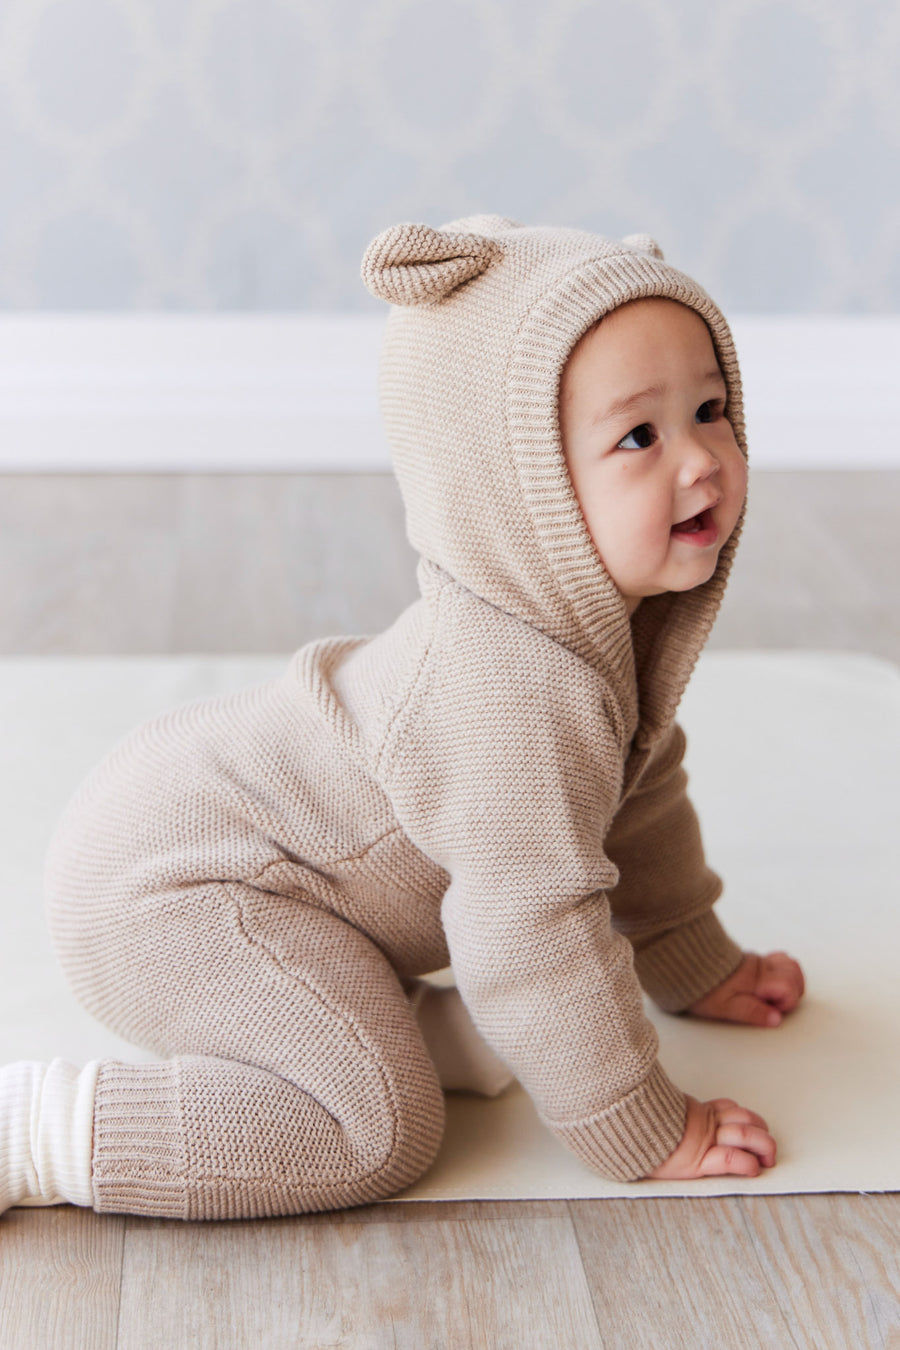 Jack Playsuit - Cashew Marle Childrens Playsuit from Jamie Kay NZ